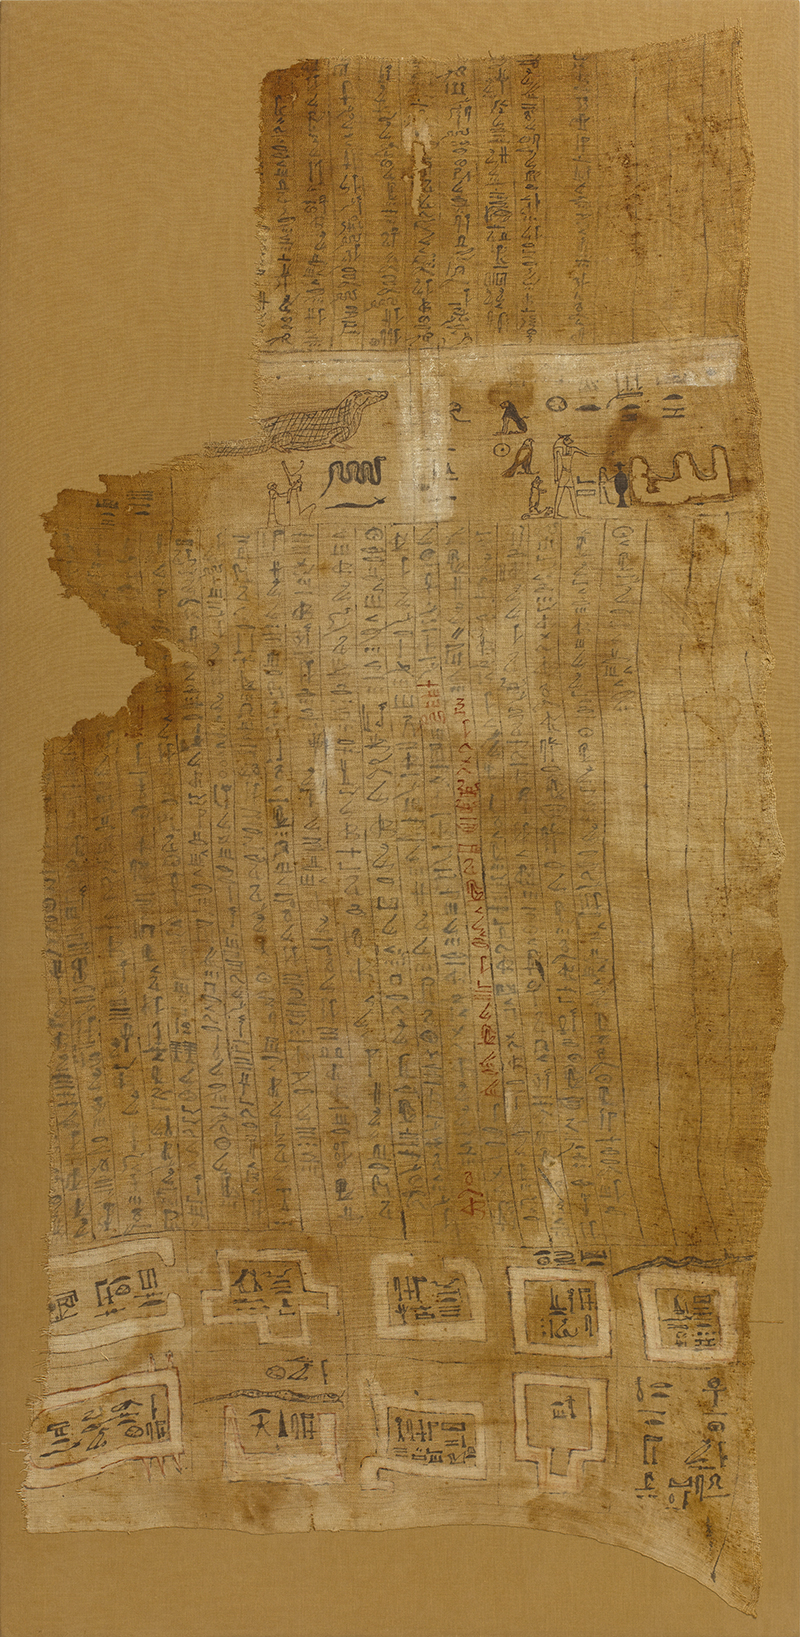 Egypt, Piece of cloth for wrapping a mummy (shroud): texts in cursive hieroglyphic script (hieratic) and rows of vignettes representing divinities and places Linen, black, red and white ink  Acquisition, 2014 E 33 171